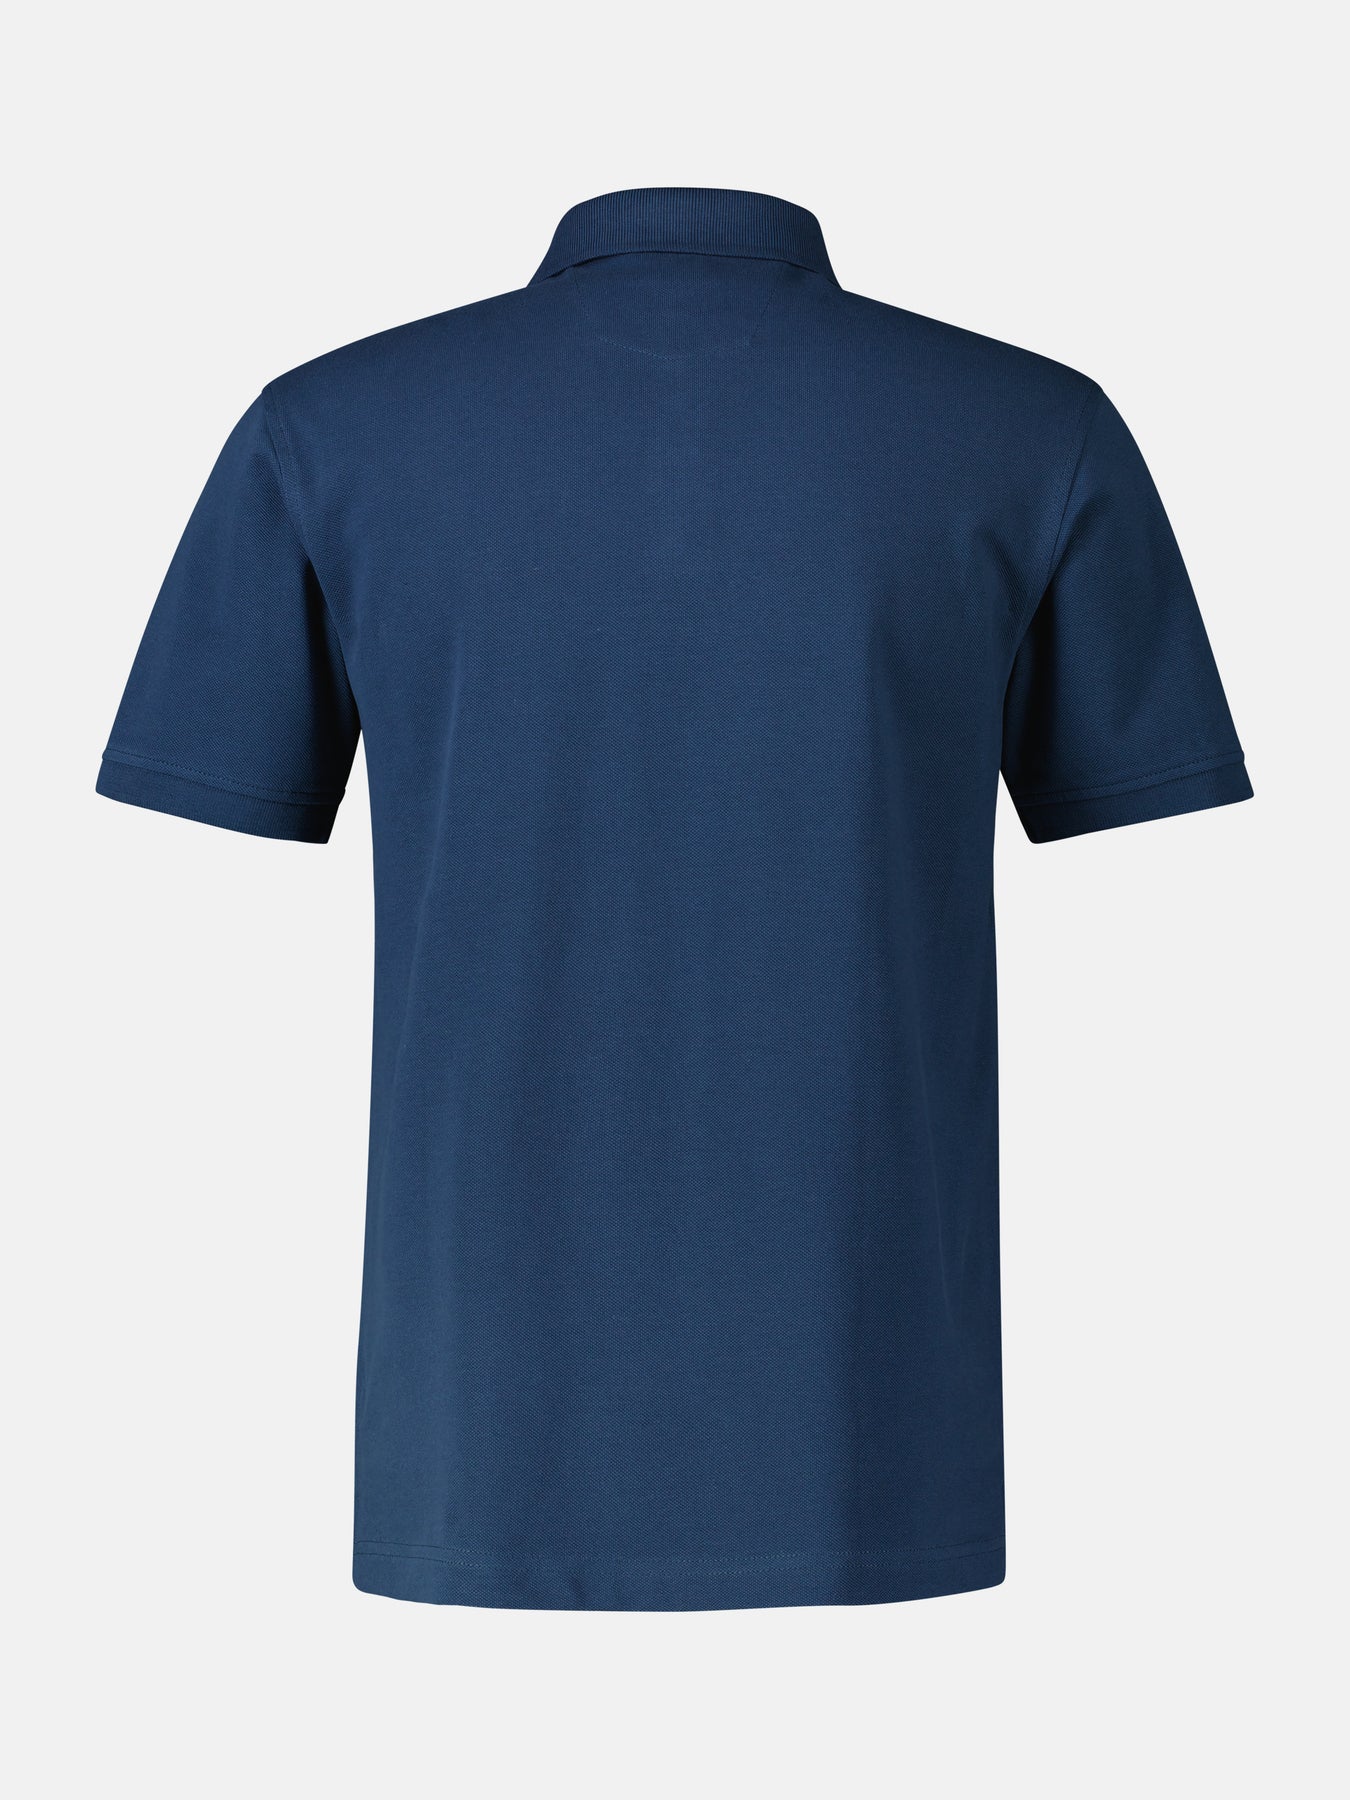 Polo shirt in many colors – LERROS SHOP